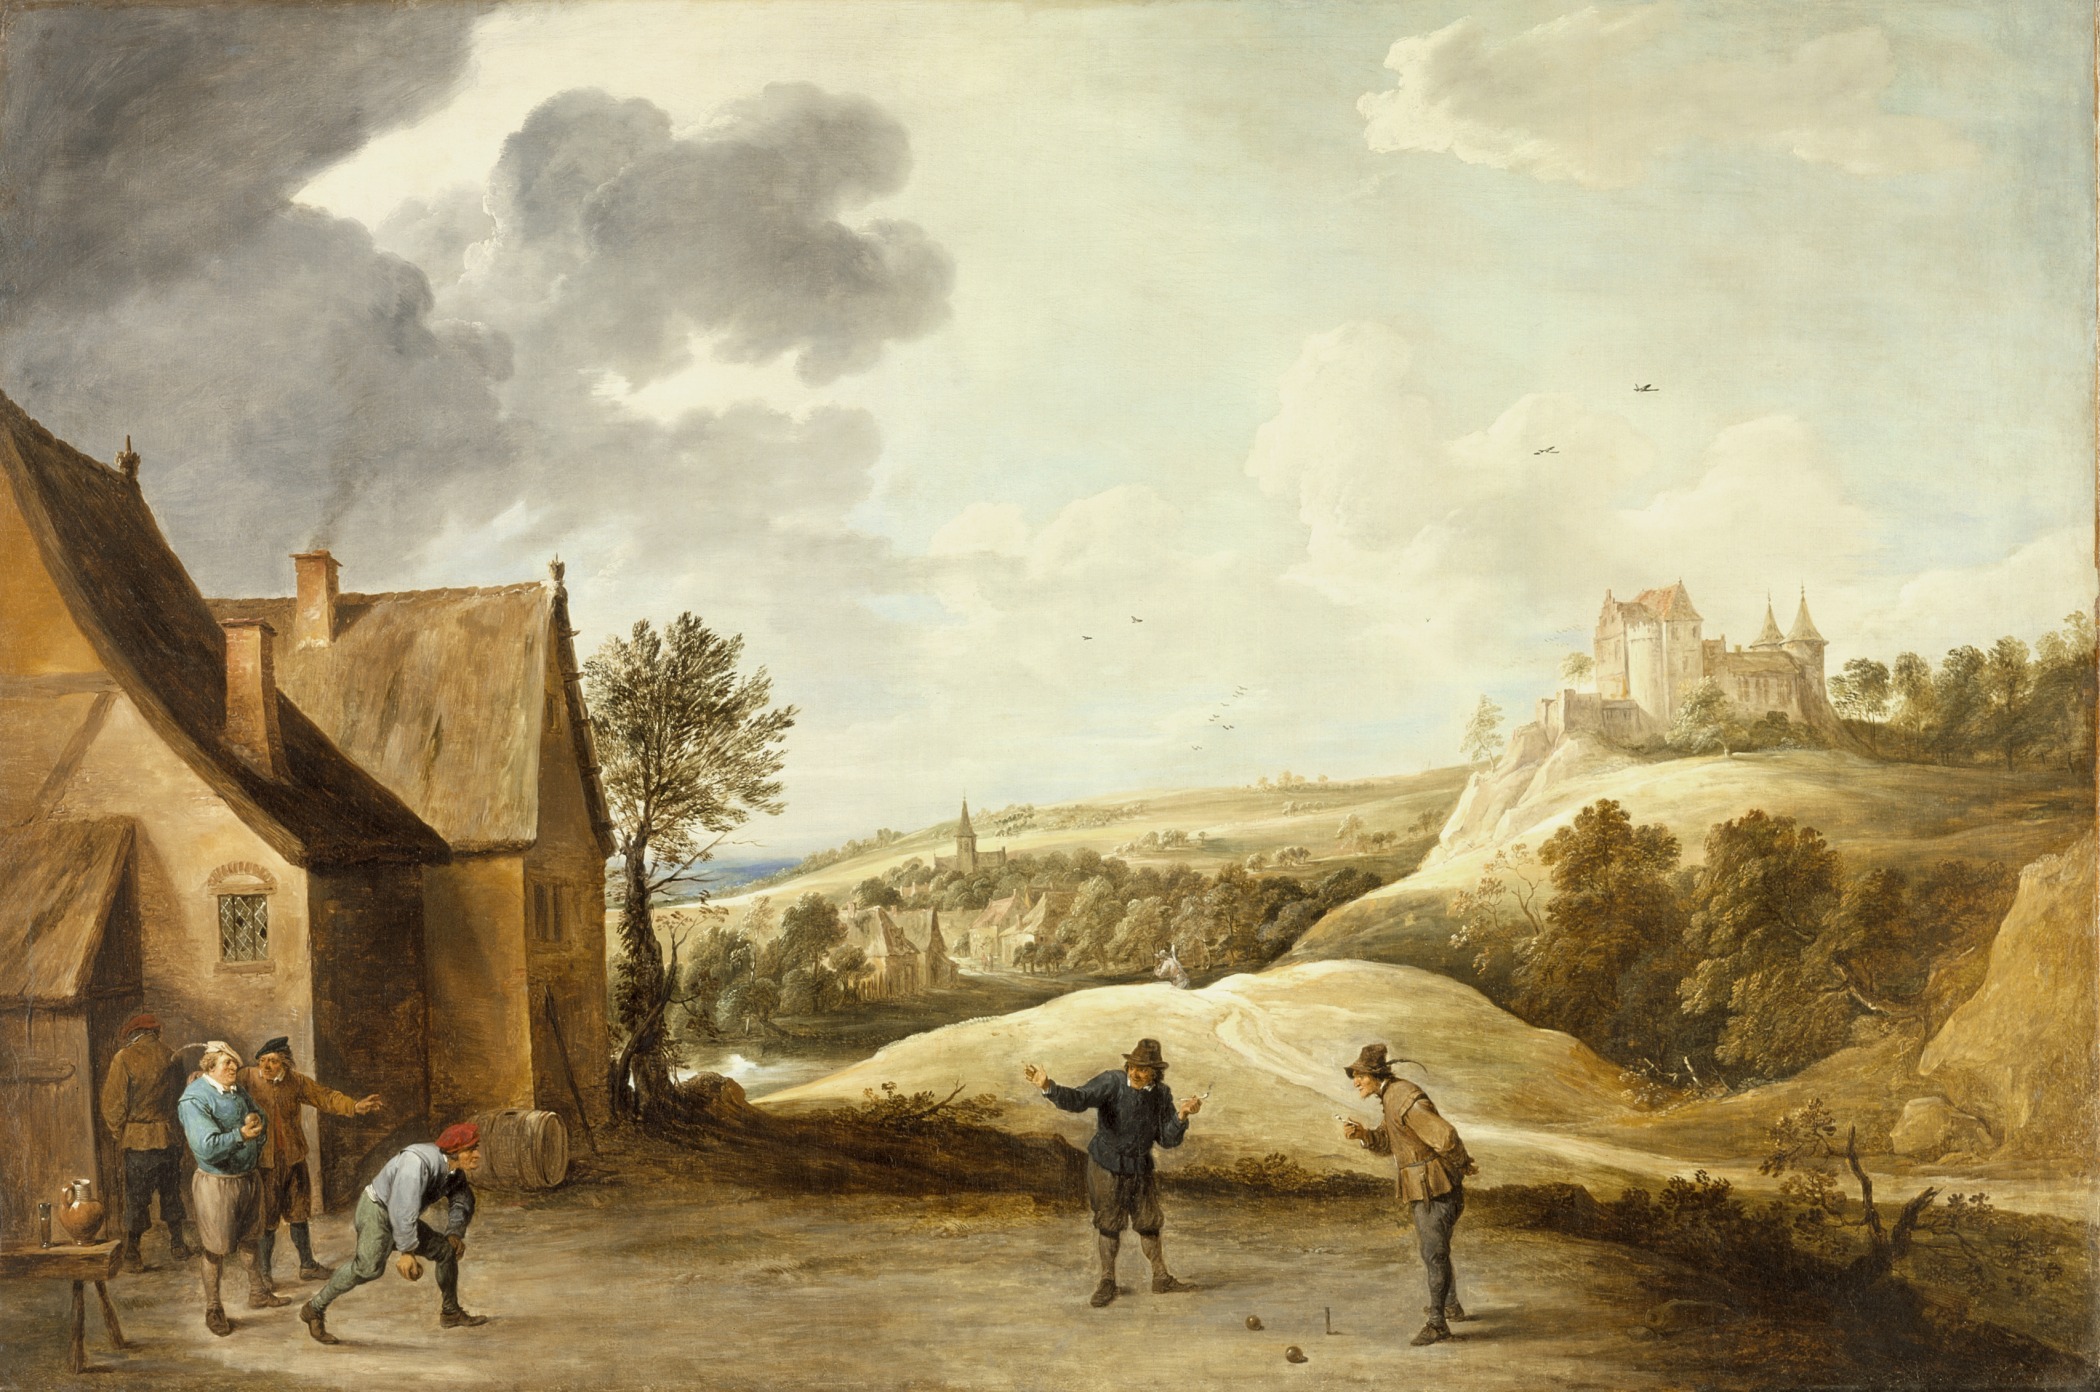 David Teniers (II) - Landscape with Peasants Playing Bowls Outside an Inn, LACMA 46.49.4